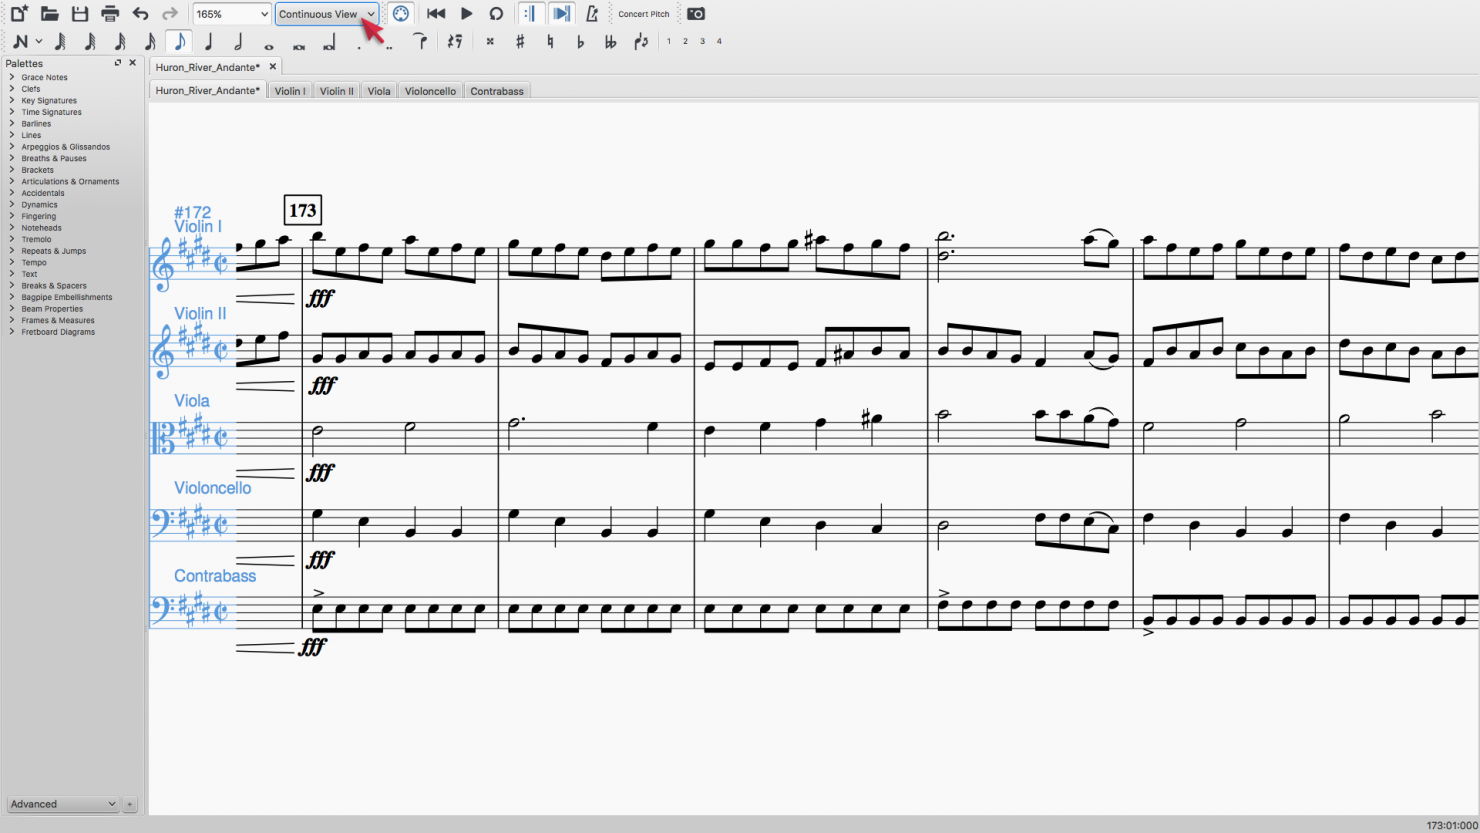 Continuous View (panoramic scrolling) in MuseScore